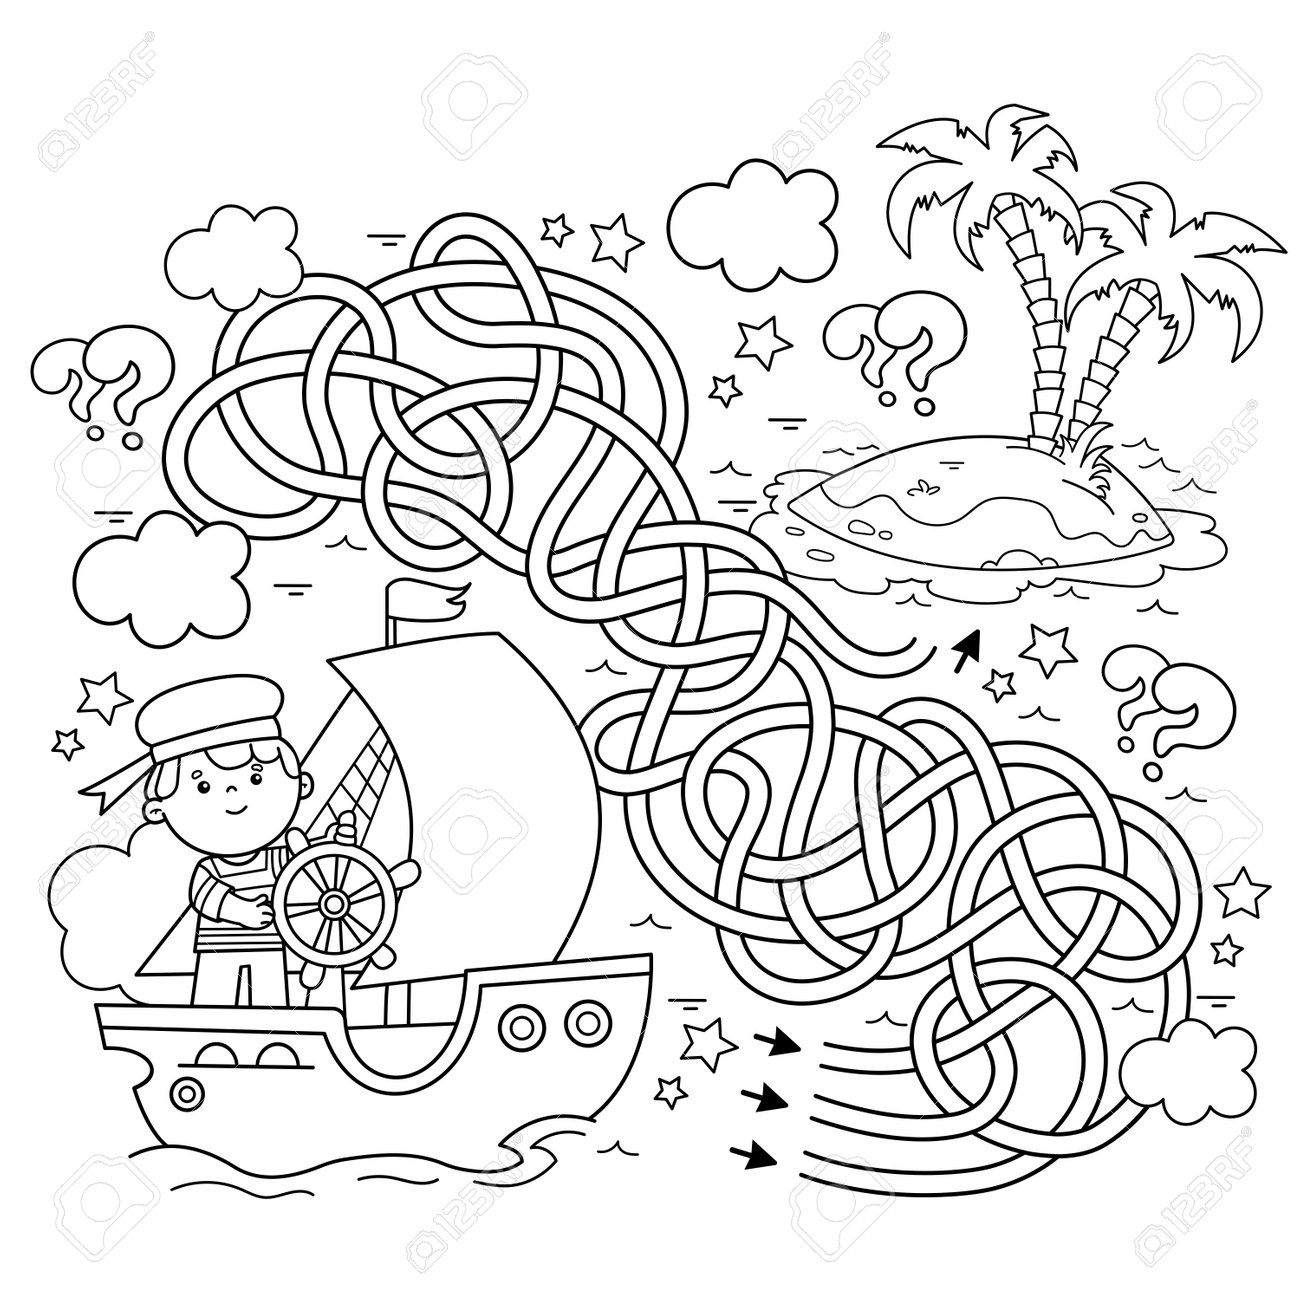 Maze or labyrinth game puzzle tangled road coloring page outline of cartoon sail ship with sailor sea travel coloring book for kids royalty free svg cliparts vectors and stock illustration image